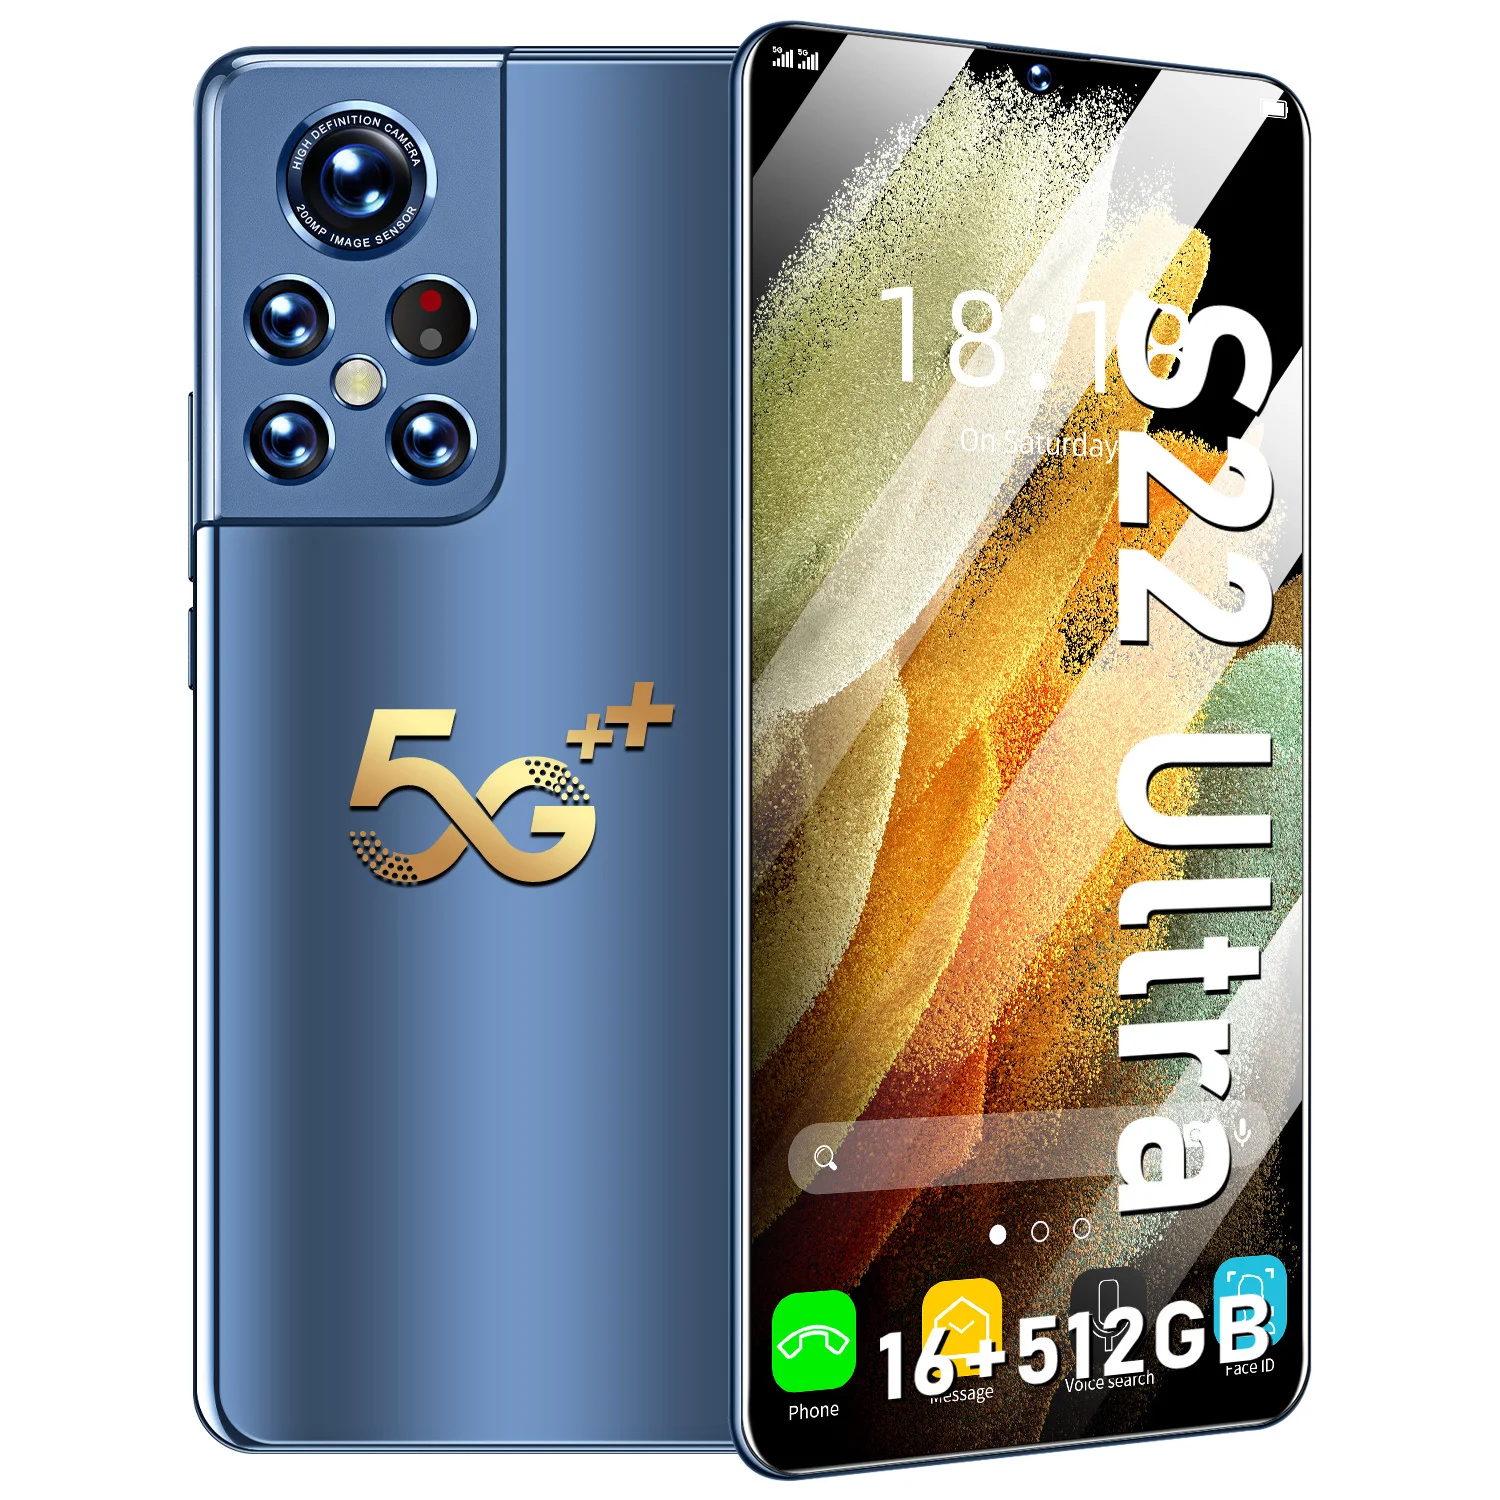 

5G Original S22 Ultra Smartphone 6.9 inch Full Screen 16+512GB Android Mobile Phones With Face ID Unlocked Cell Phone, Blue/black/green